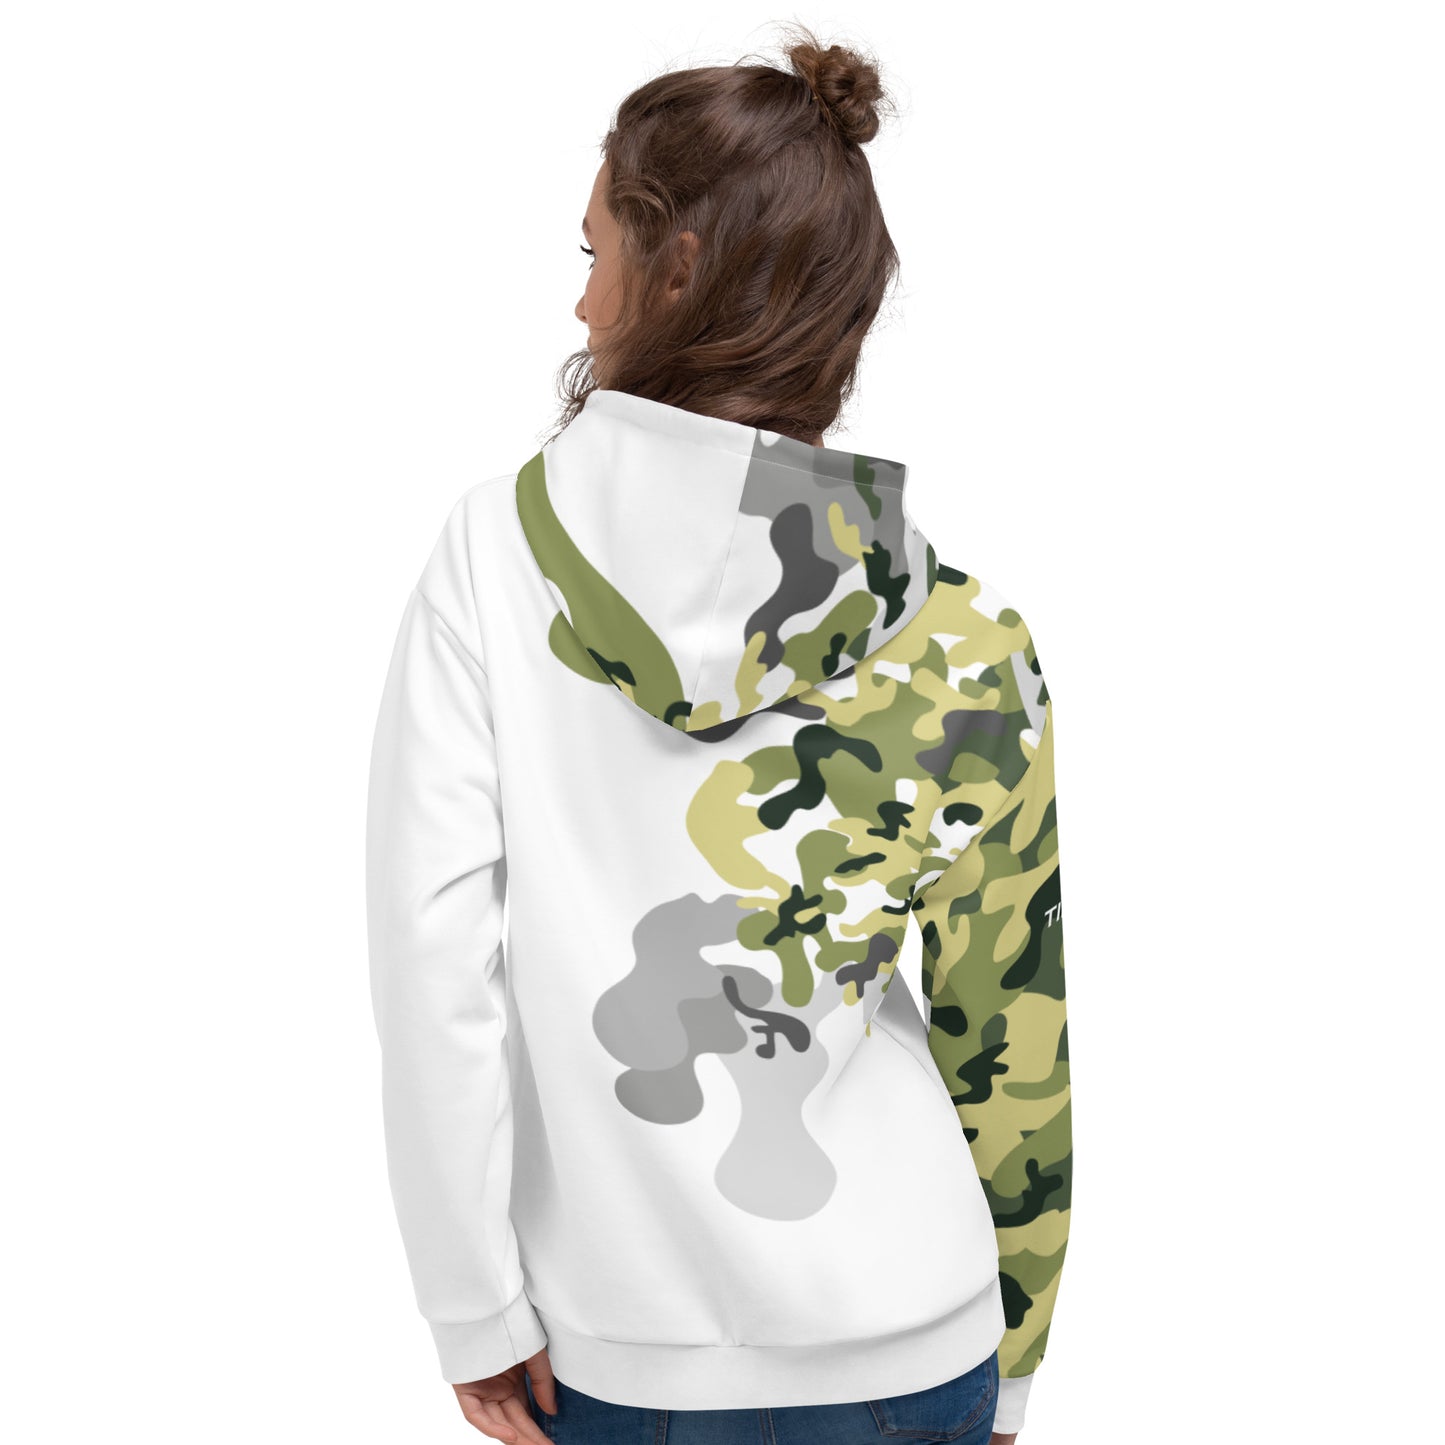 TIME OF VIBES - Premium Hoodie CAMOUFLAGE (White/Grey/Green) - €99.00